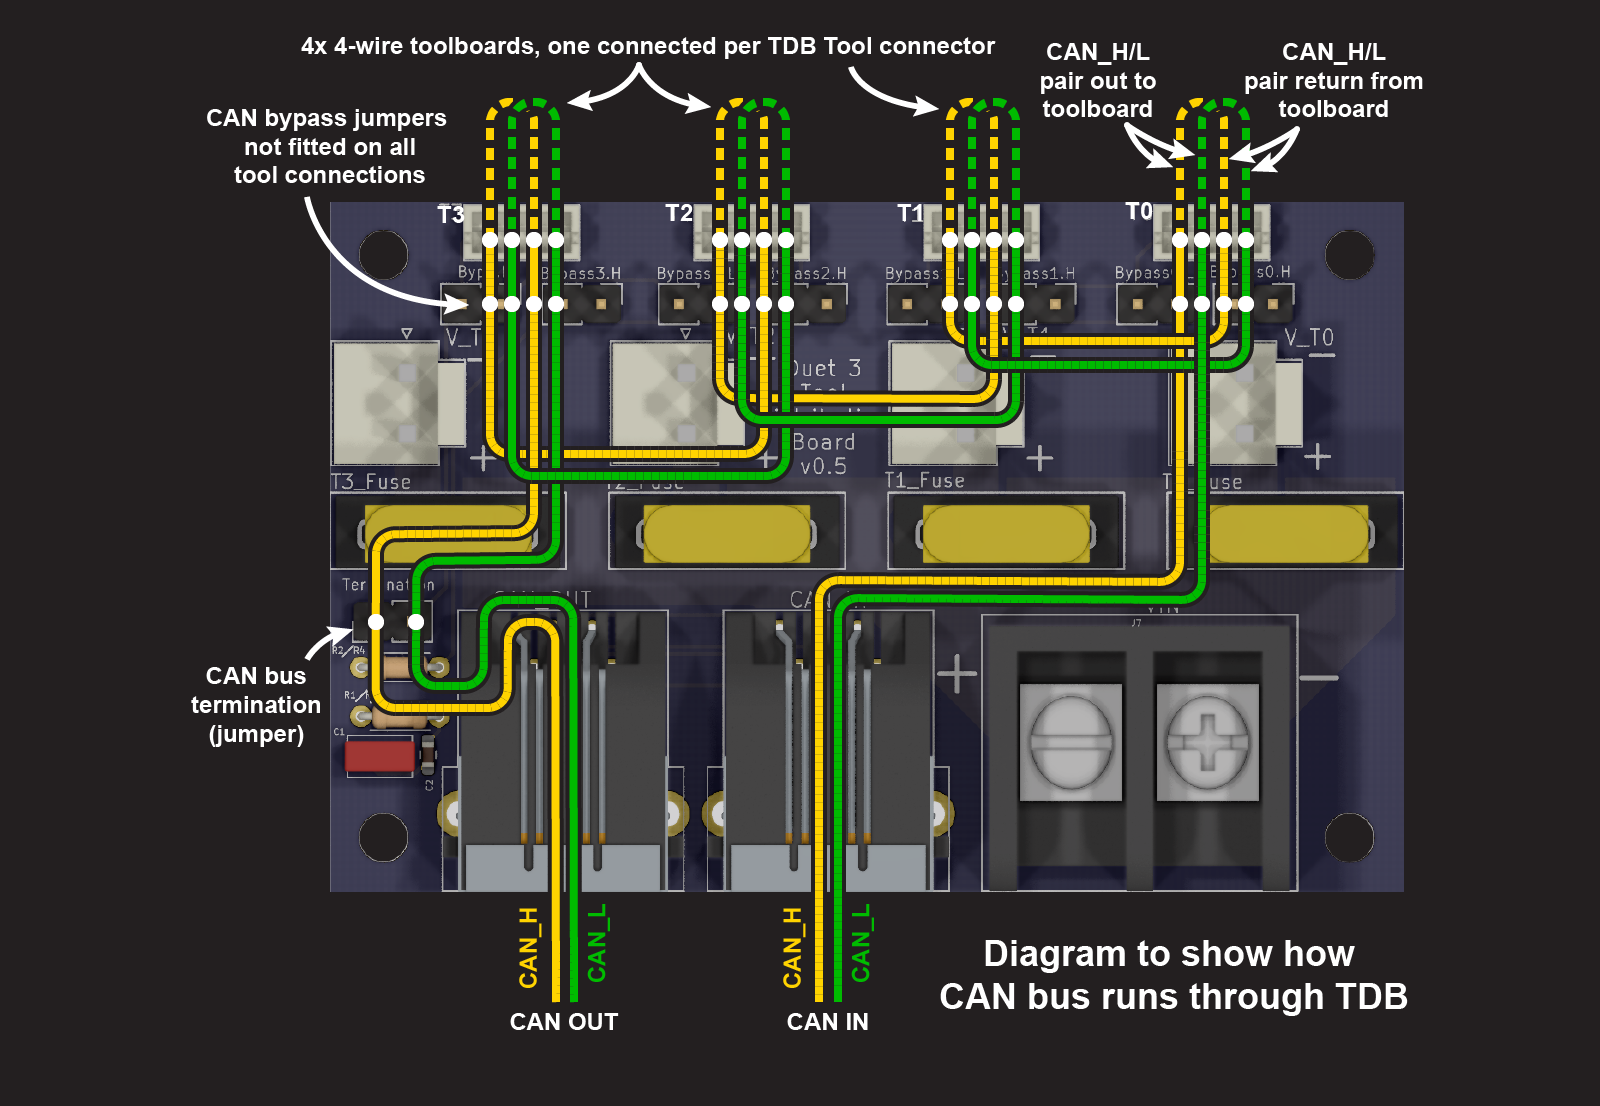 duet_3_tool_distribution_board_can_diagram.png